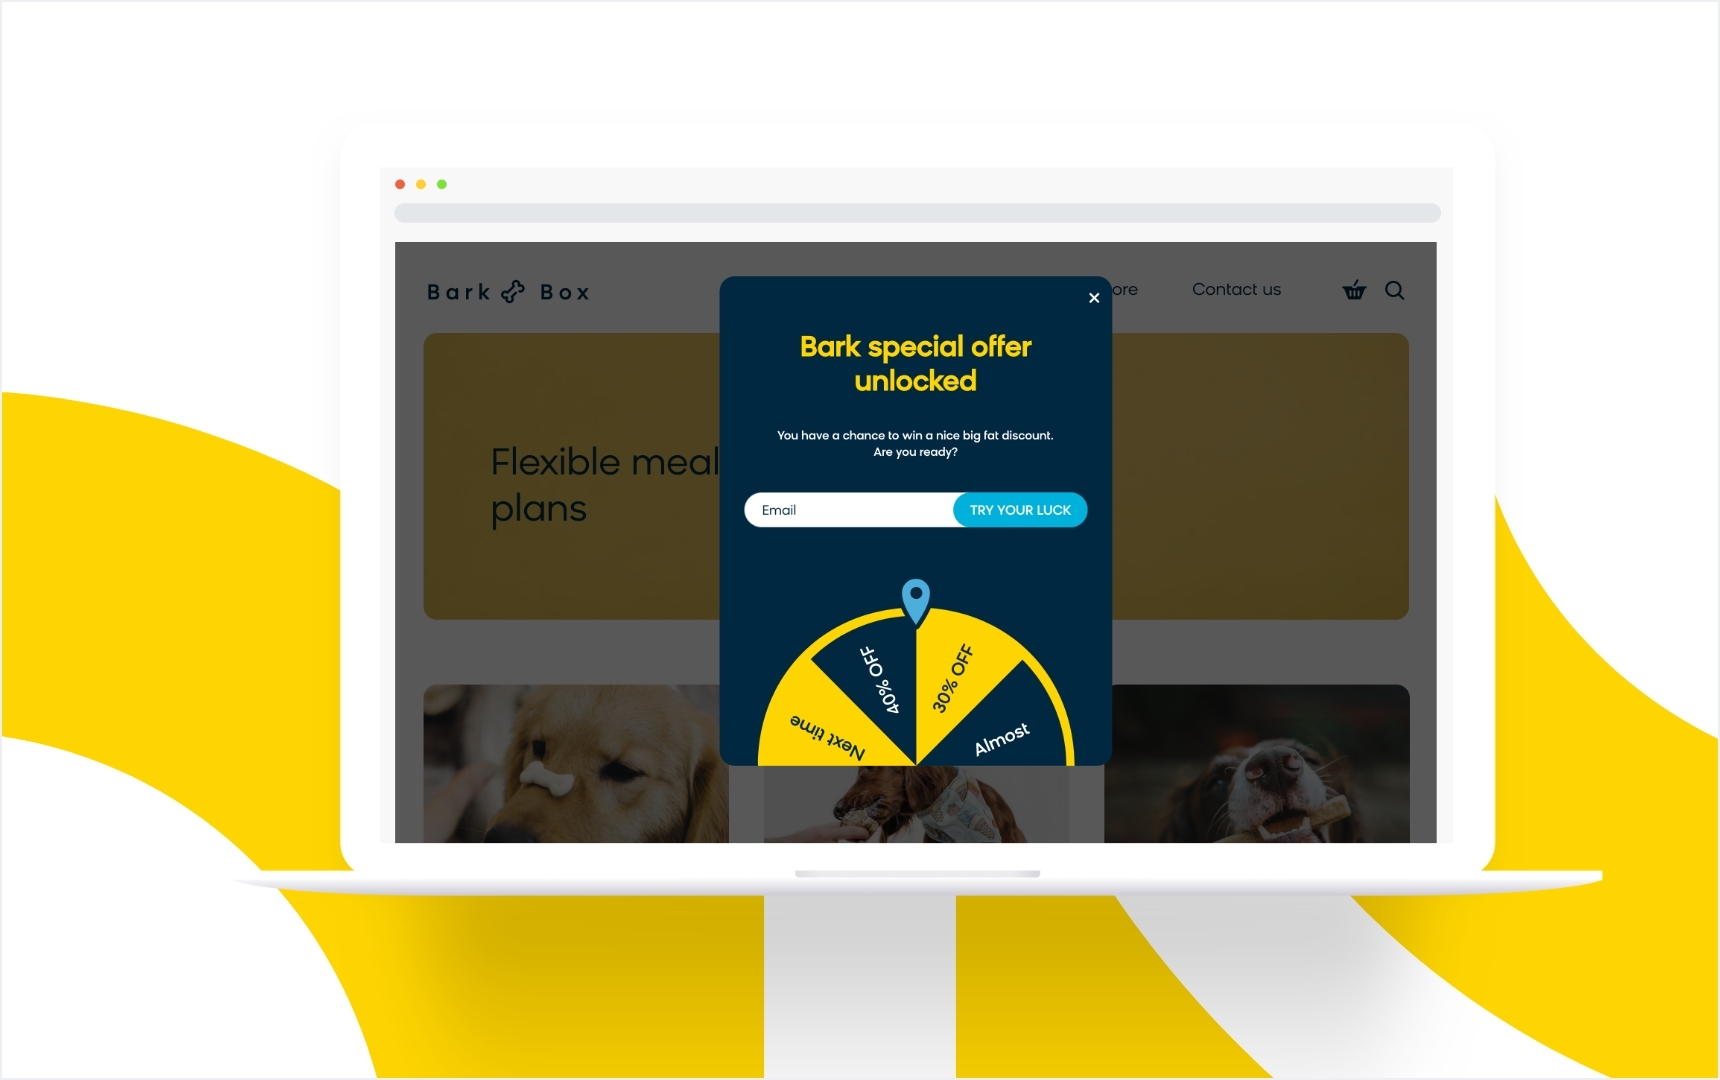 Adding a spin-to-win wheel as an on-site weblayer with Bloomreach Engagement